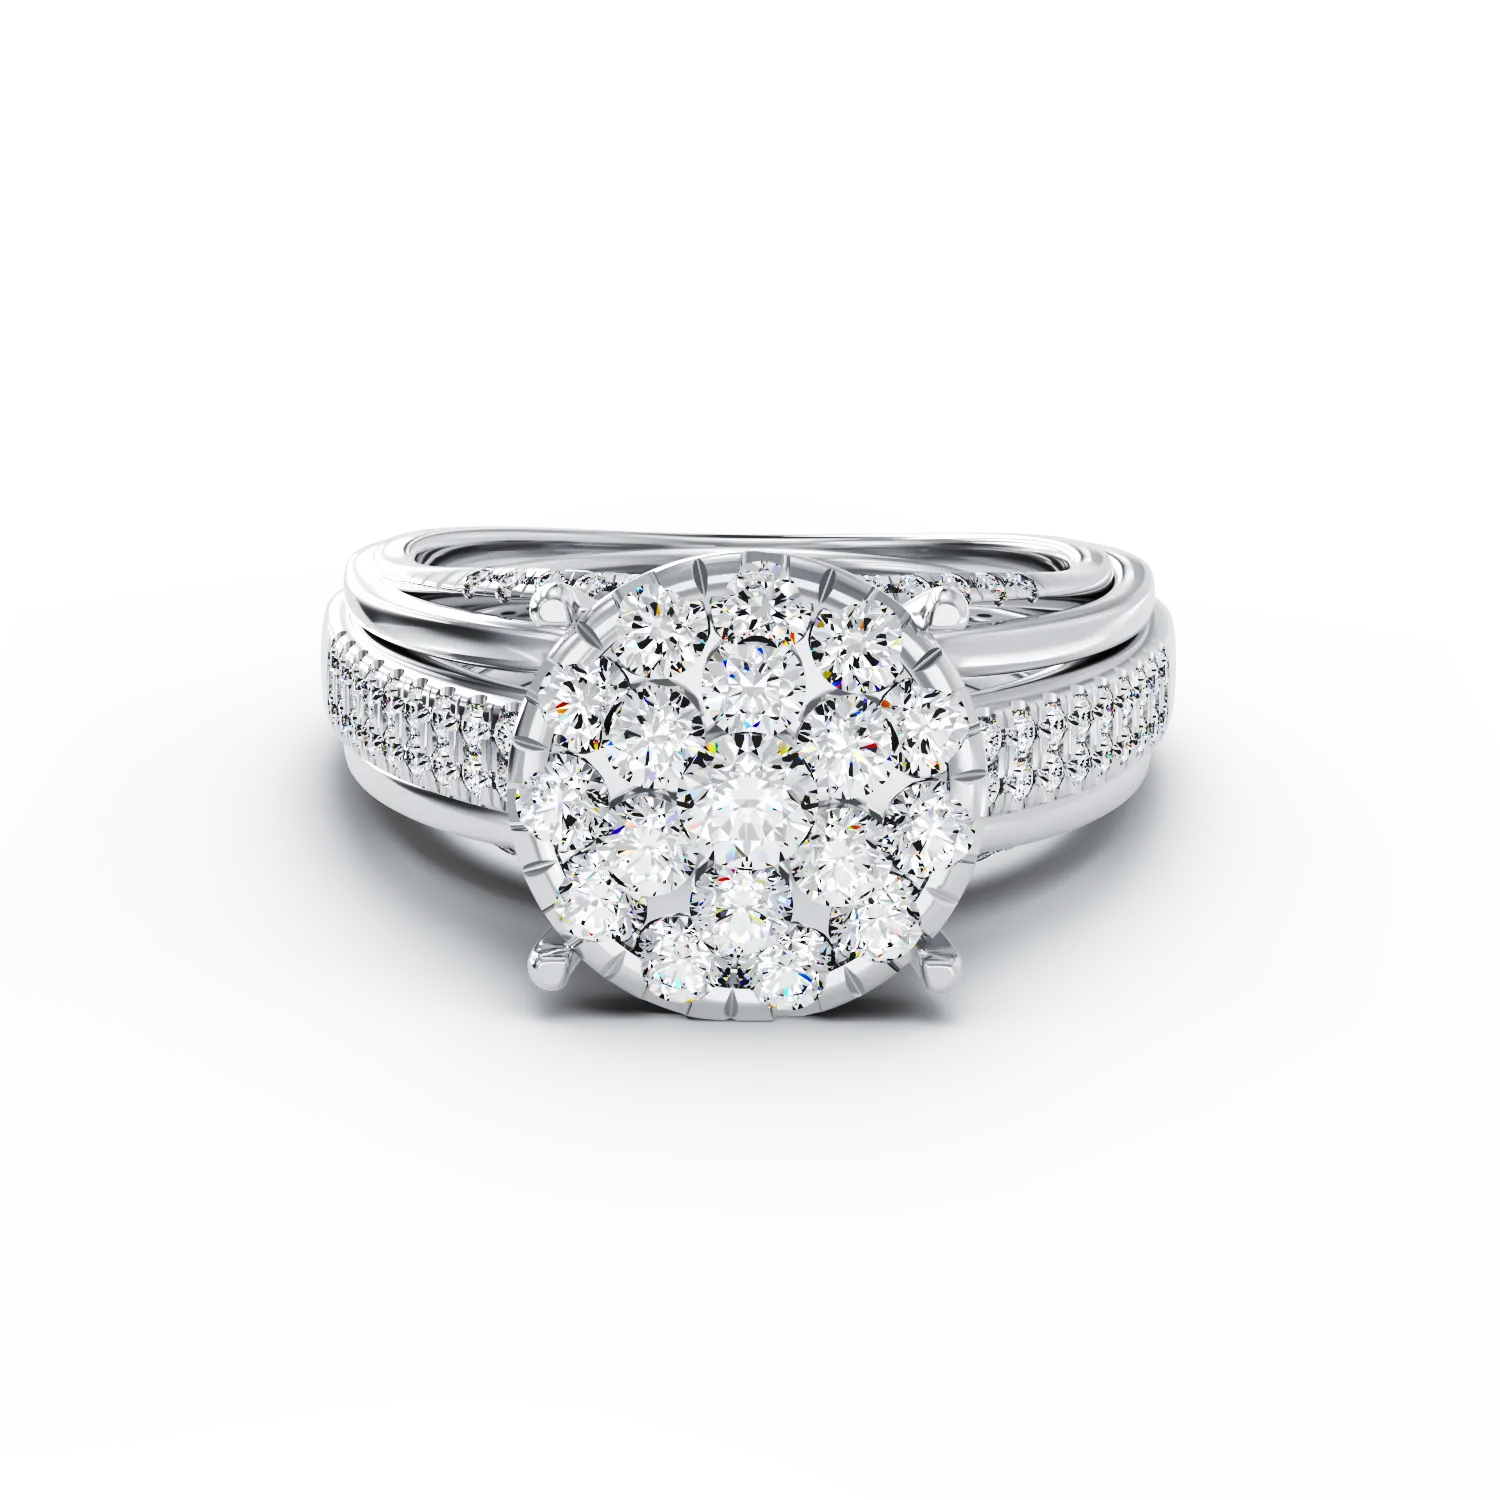 18K white gold engagement ring with 0.89ct diamonds